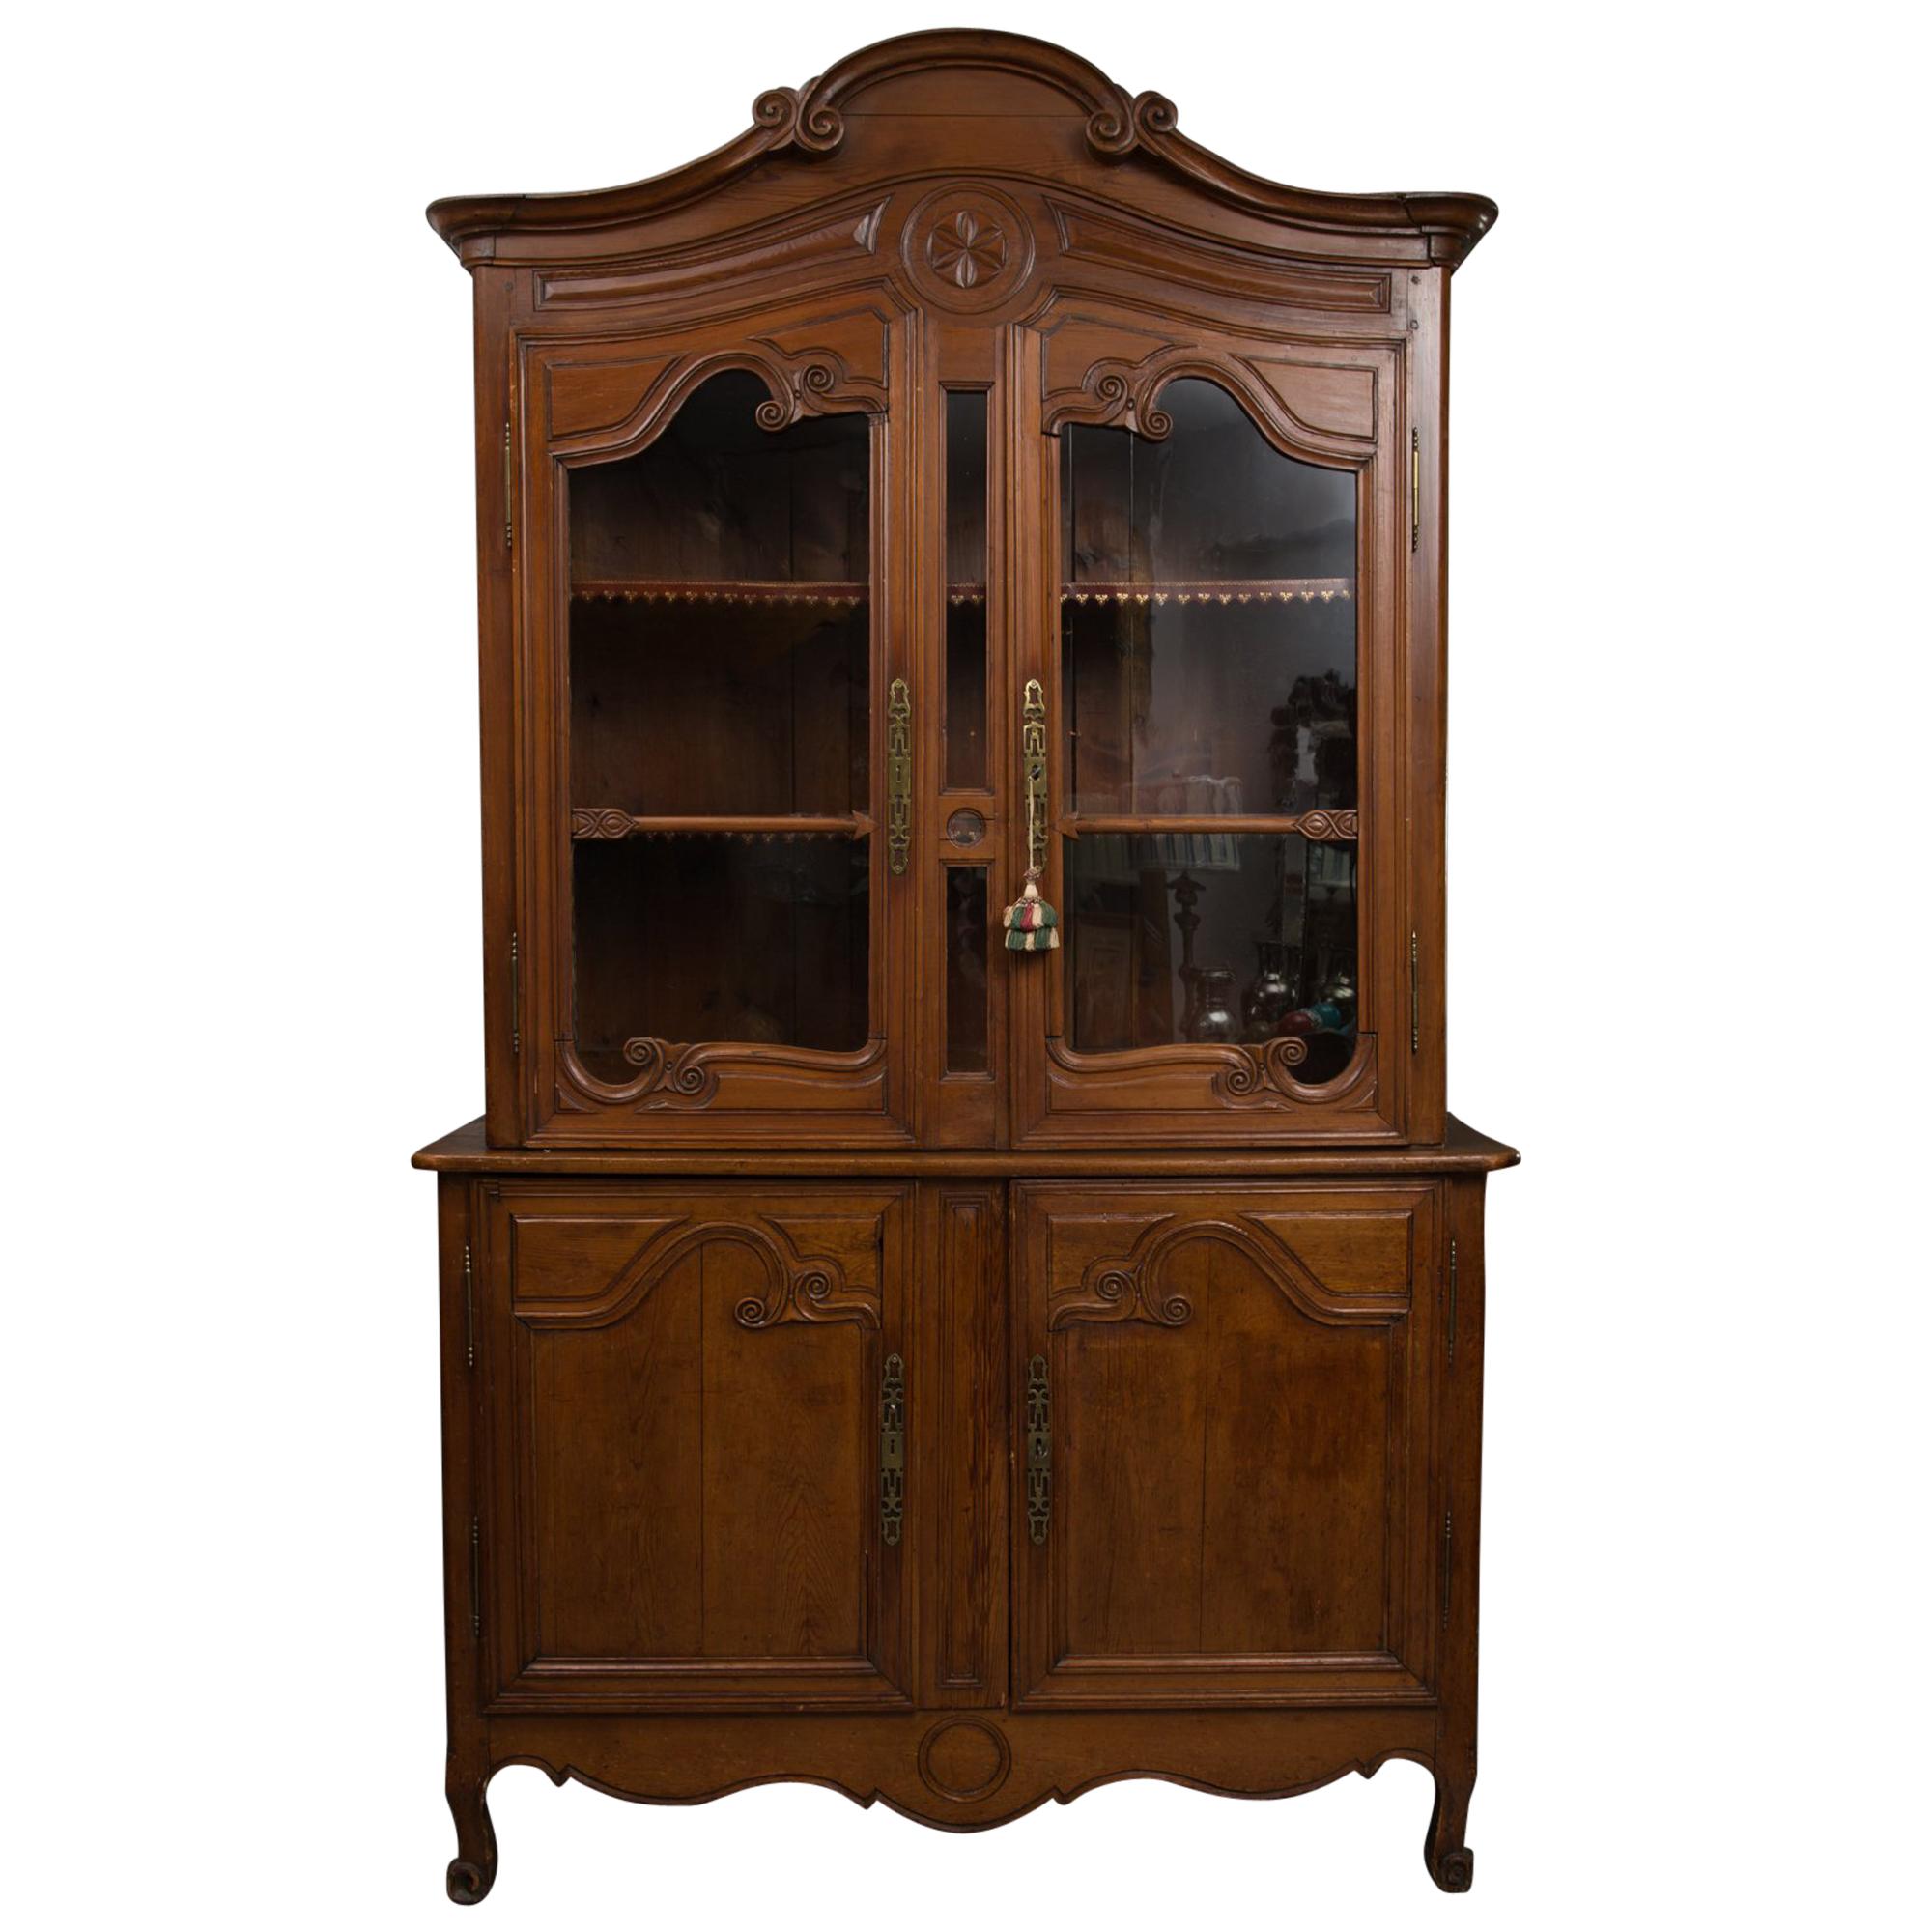 This is an early French Louis XV provincial cherrywood buffet a deluxe corps with an arched cornice over a carved conforming frieze above two glazed doors situated on a bottom section with a pair of carved paneled cabinet doors over a carved, shaped